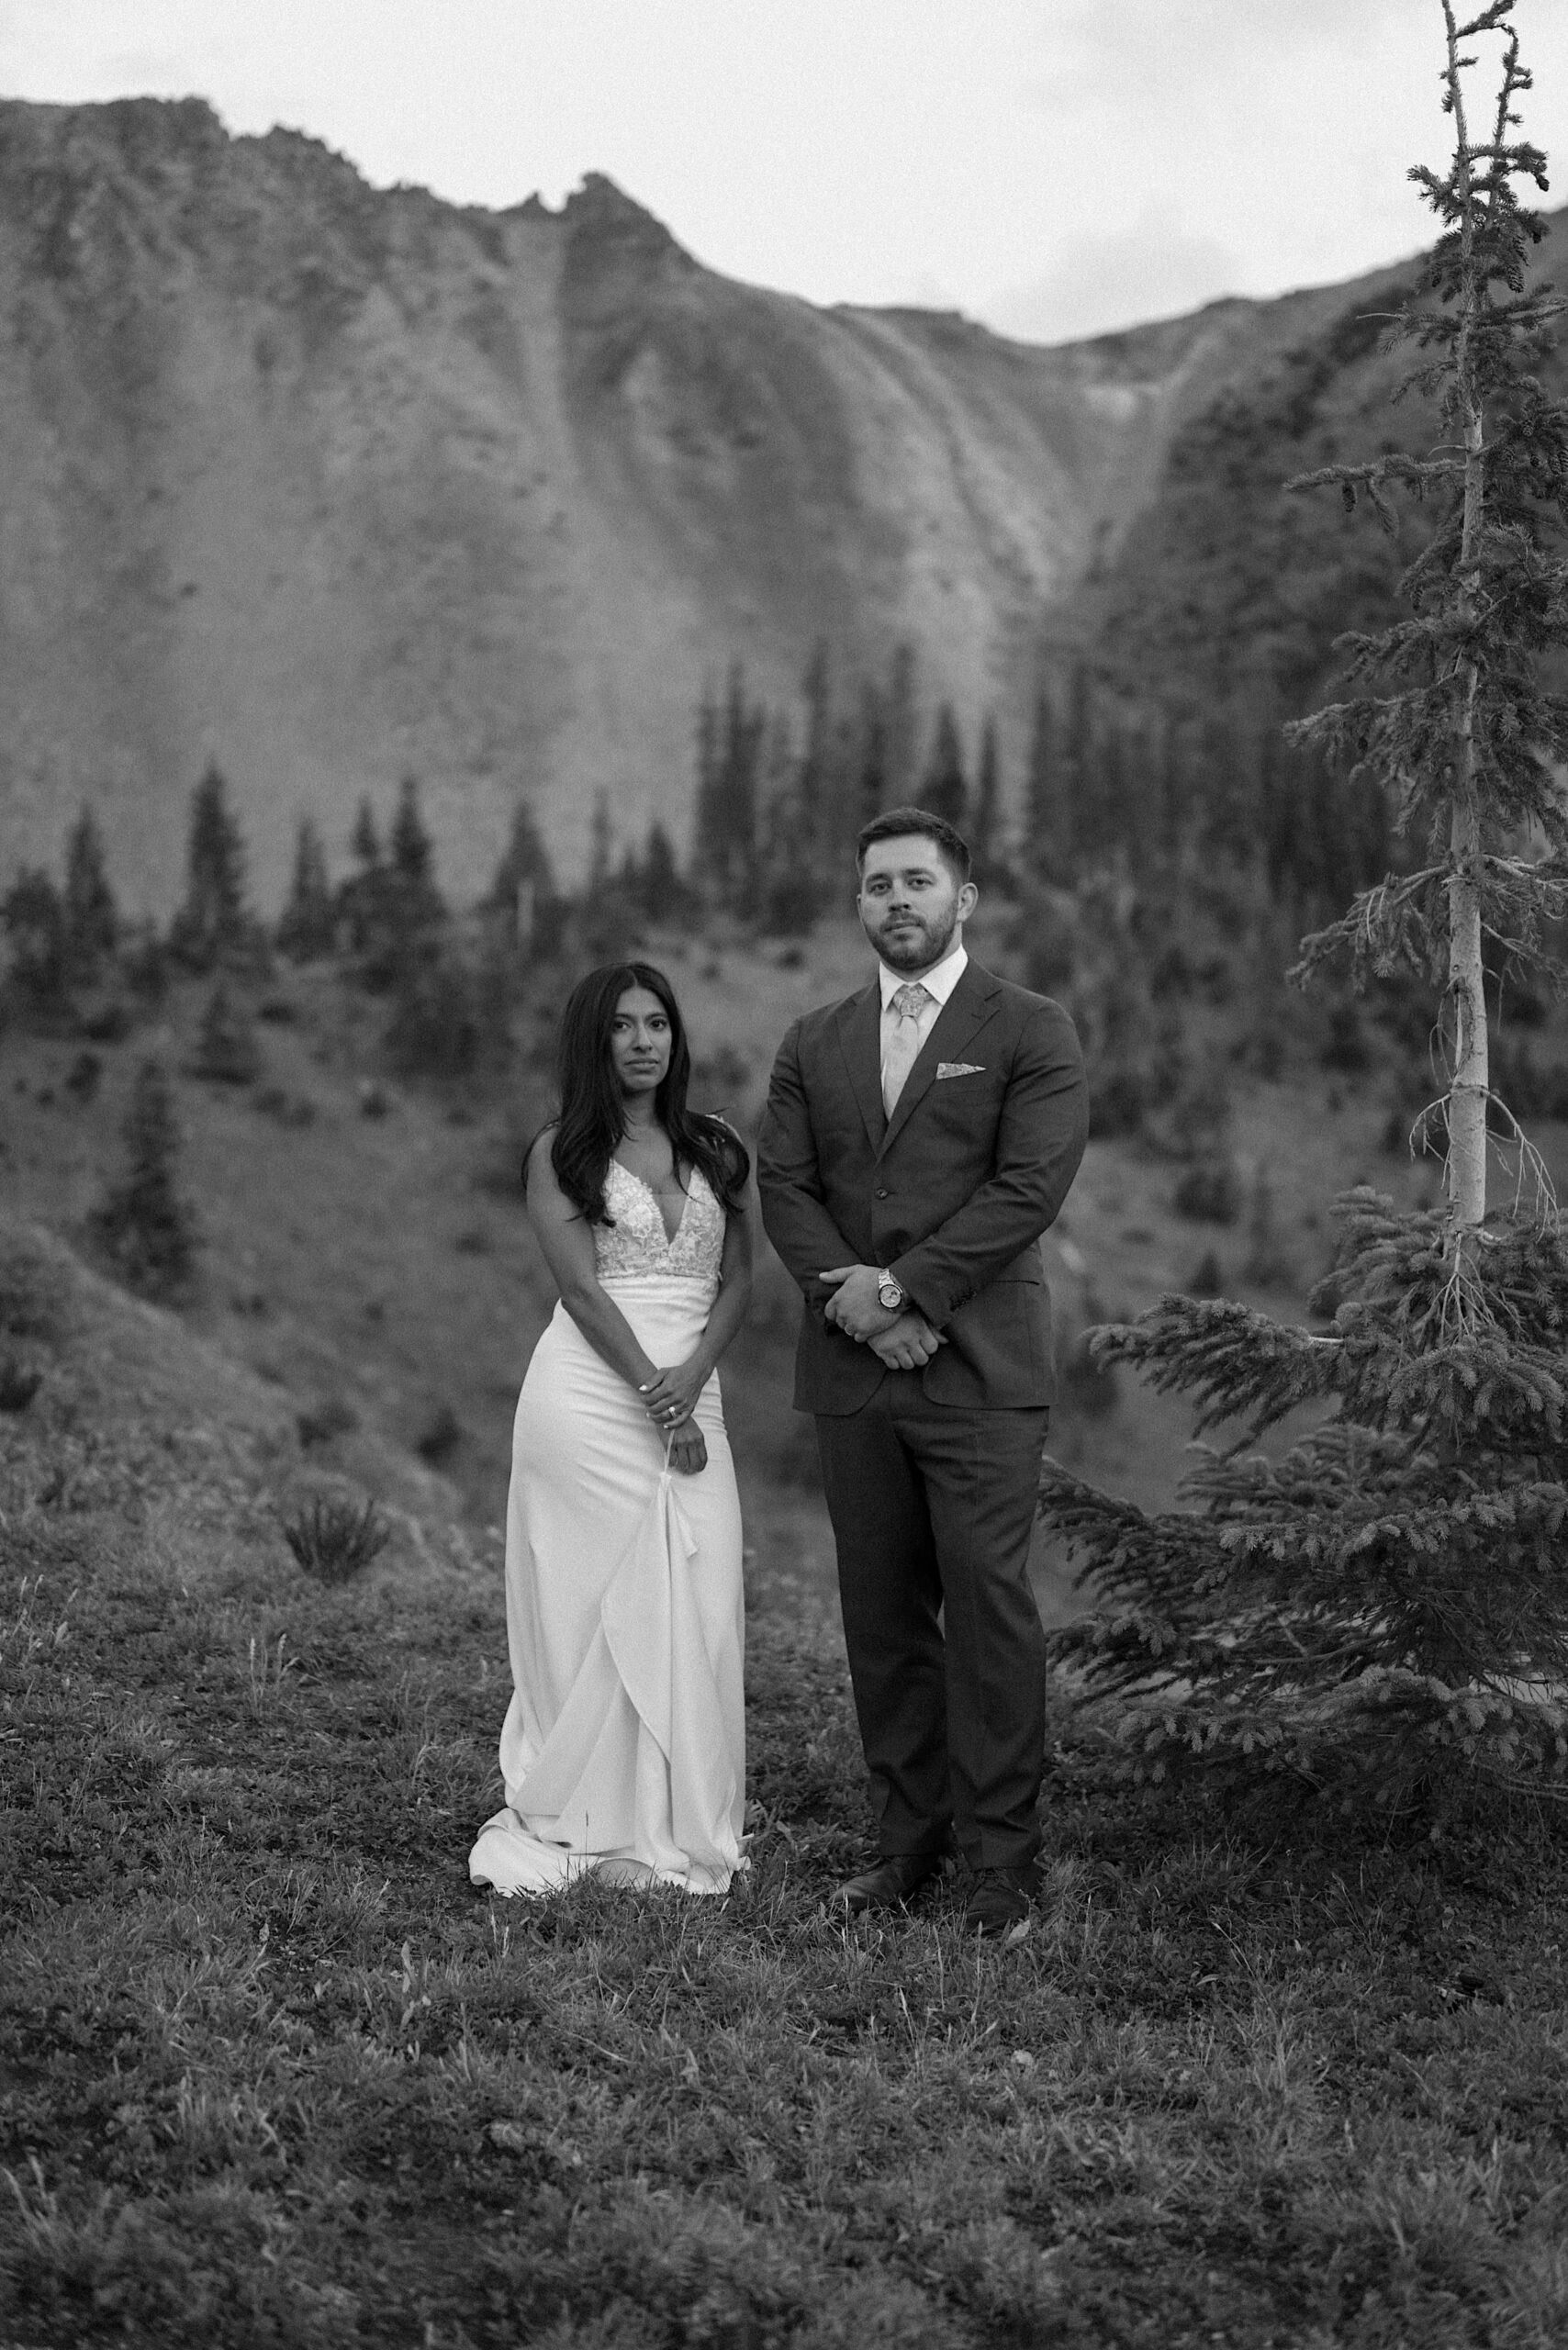 Monia & Kyle held a romantic and intimate Ouray elopement with their two dogs on a sunny autumn day. Photos by Colorado wedding photographer, Ashley Joyce.